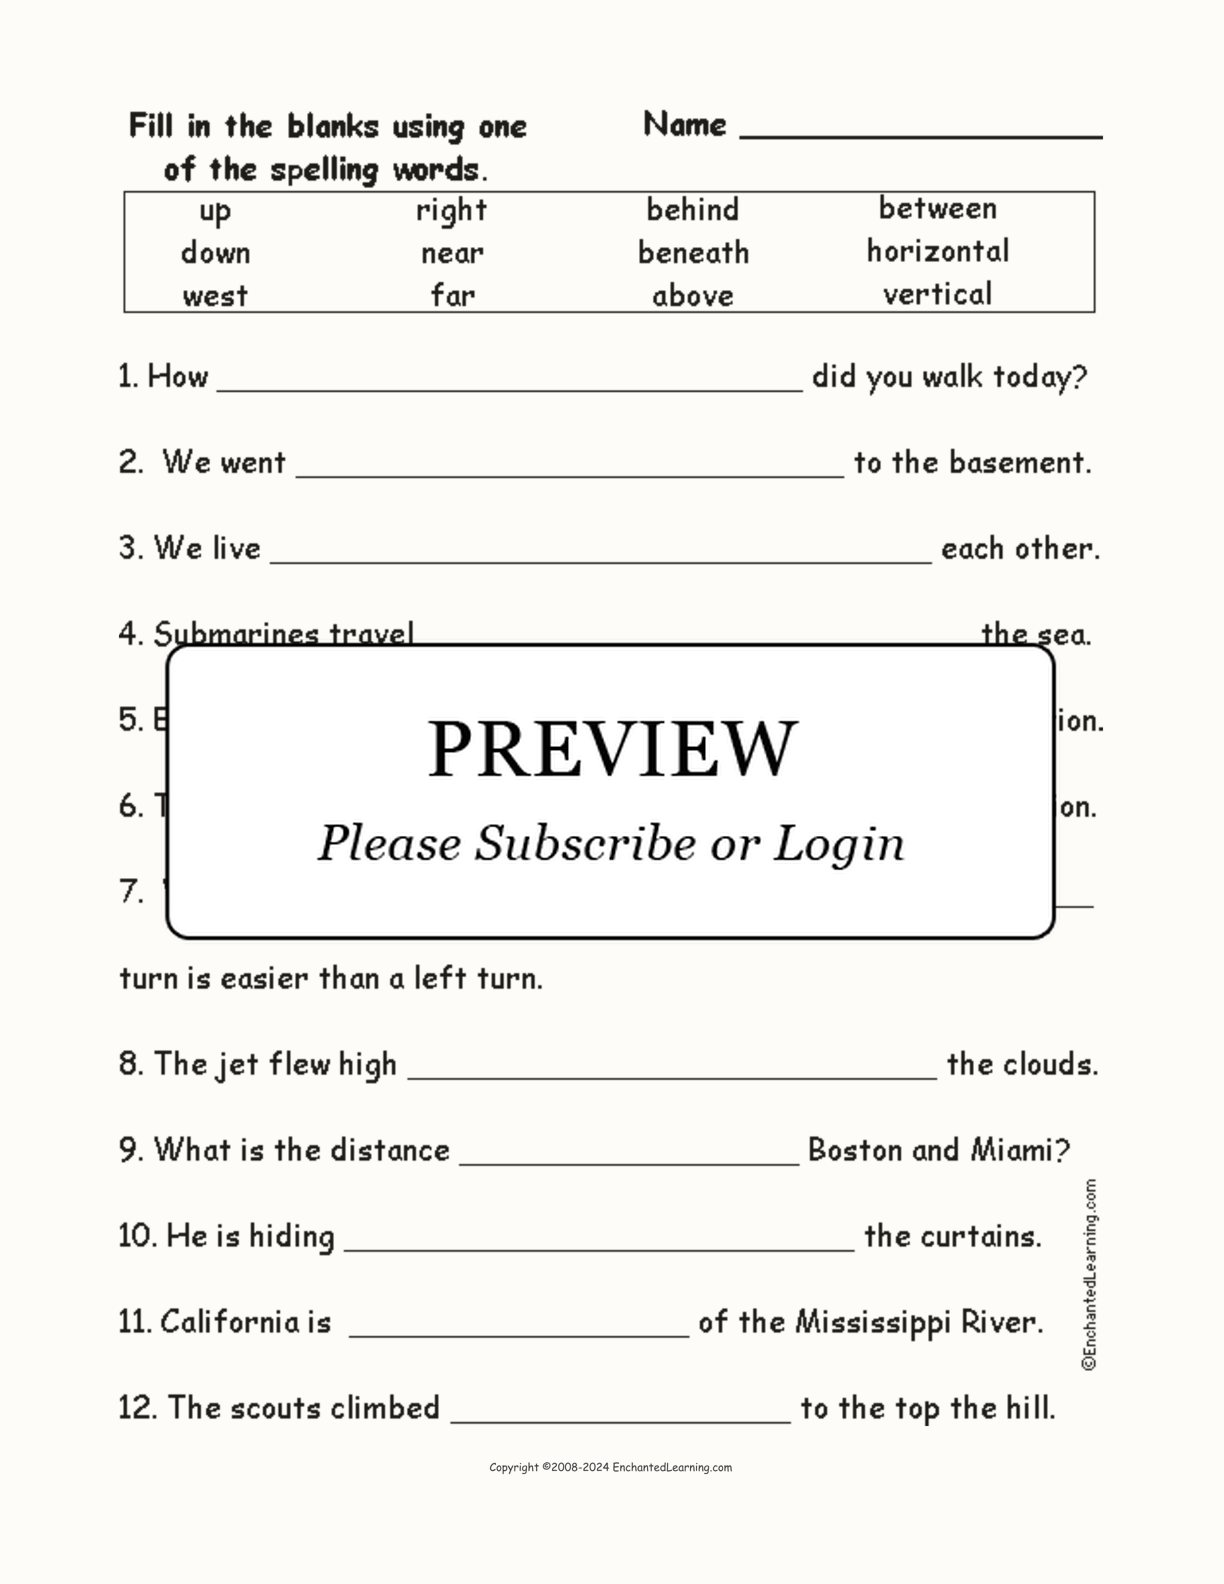 Location: Spelling Word Questions interactive worksheet page 1